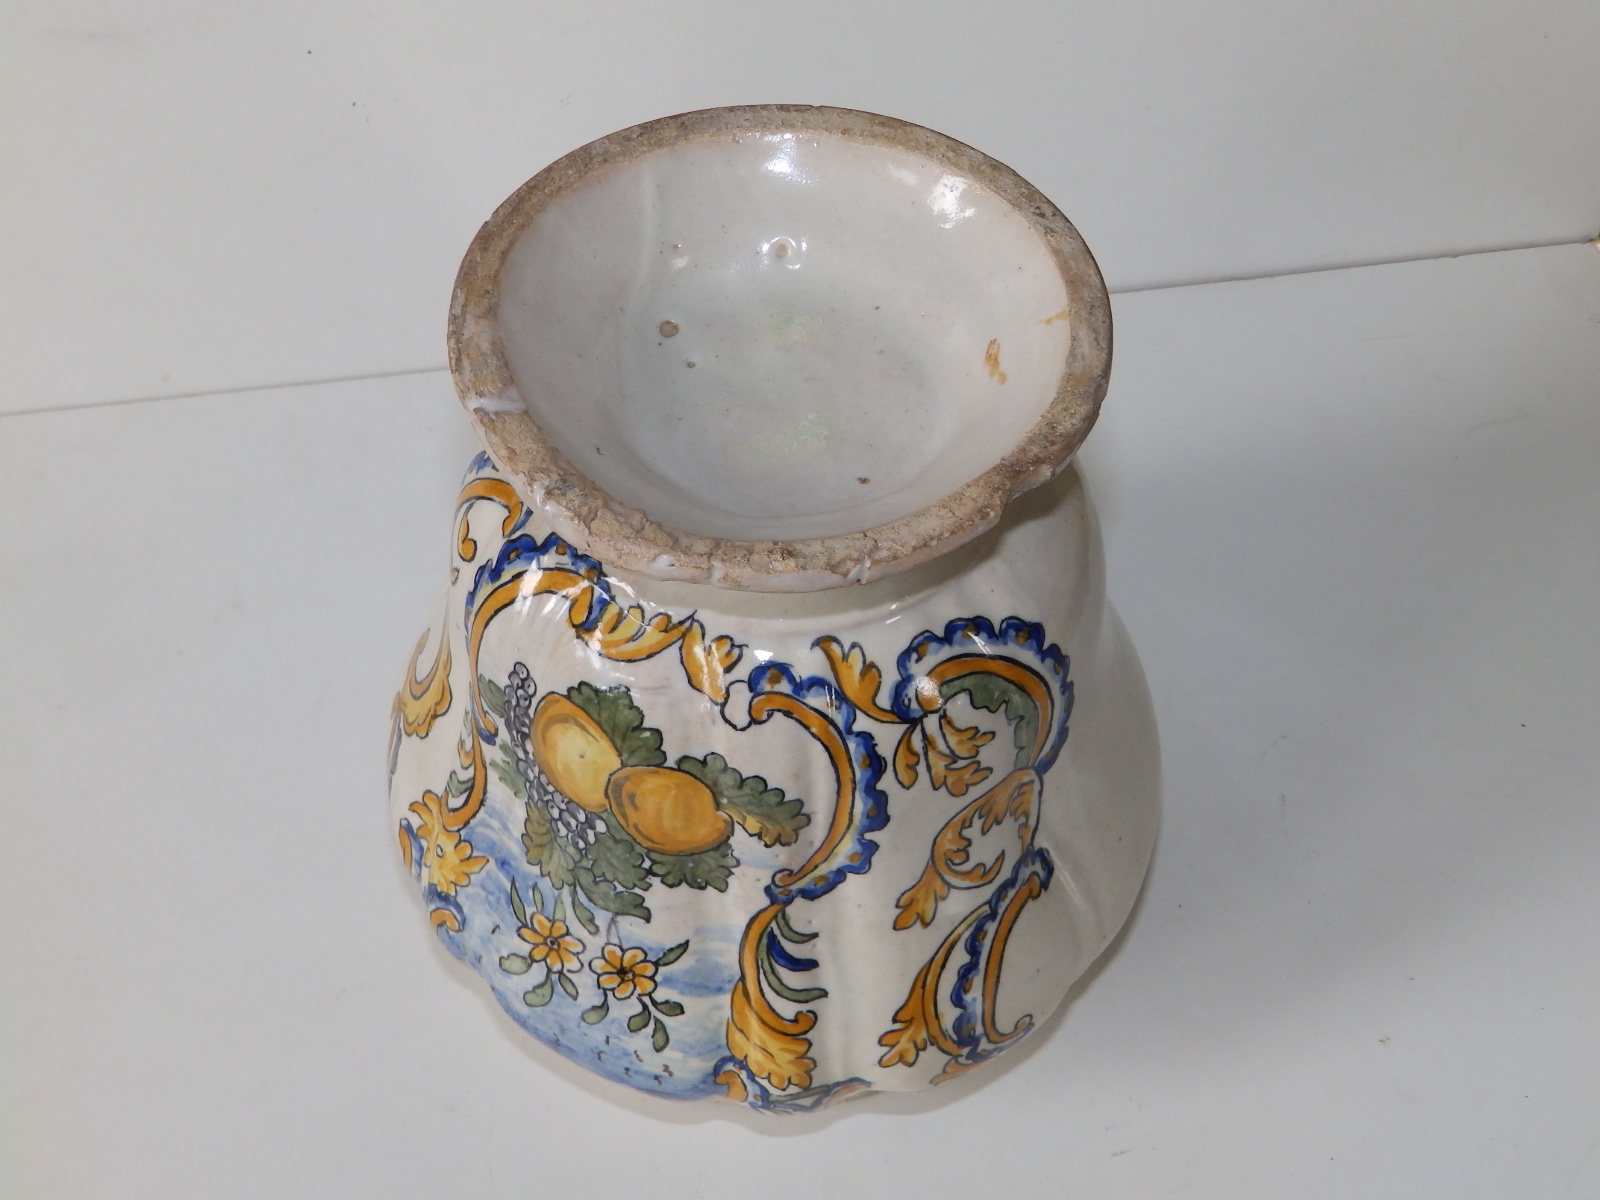 An 18thC continental maiolica jar, probably Italian, decorated with a cartouche depicting a - Image 4 of 4